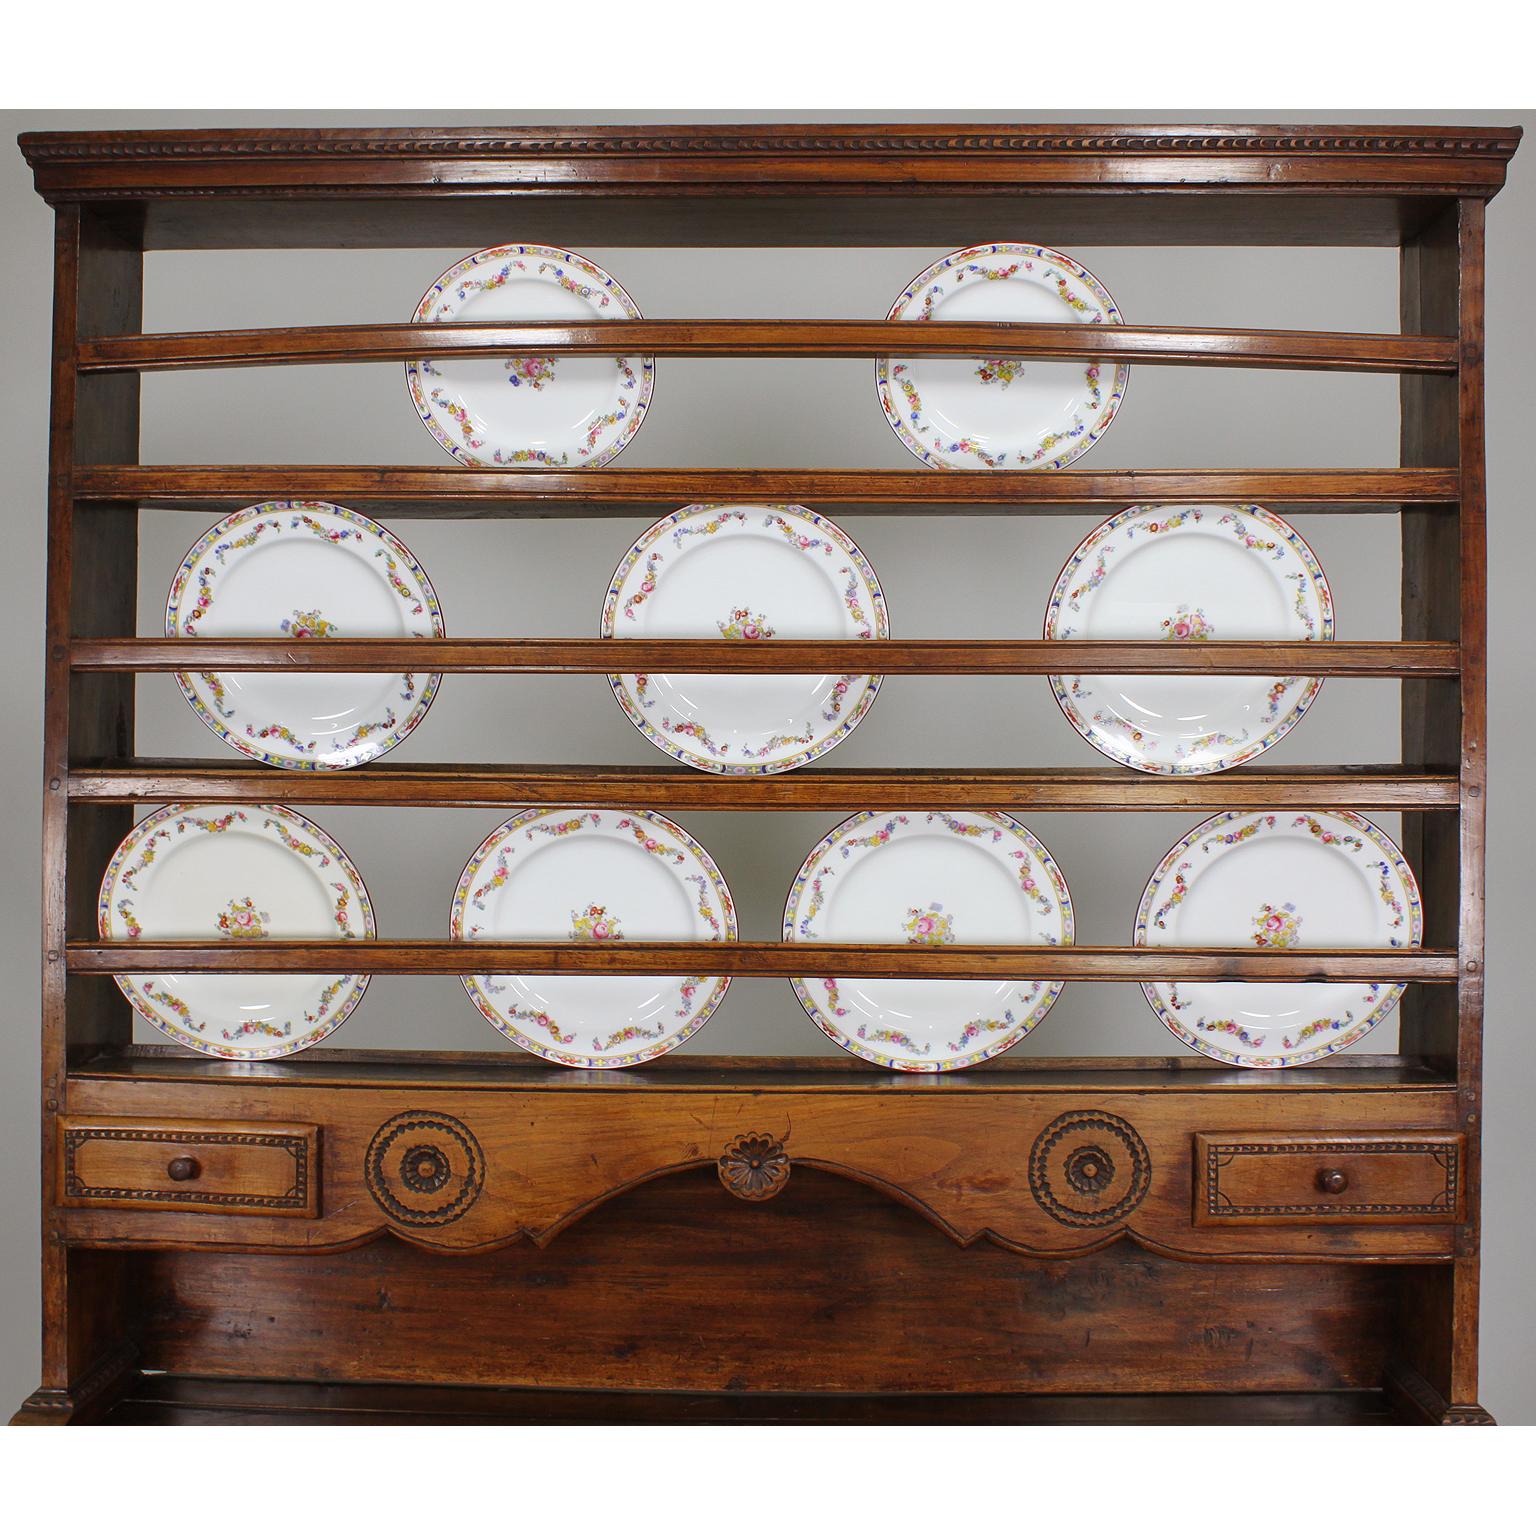 Louis XV A French 18th-19th C. Provincial Louis  XV Style Walnut Vaisselier Hutch Buffet For Sale